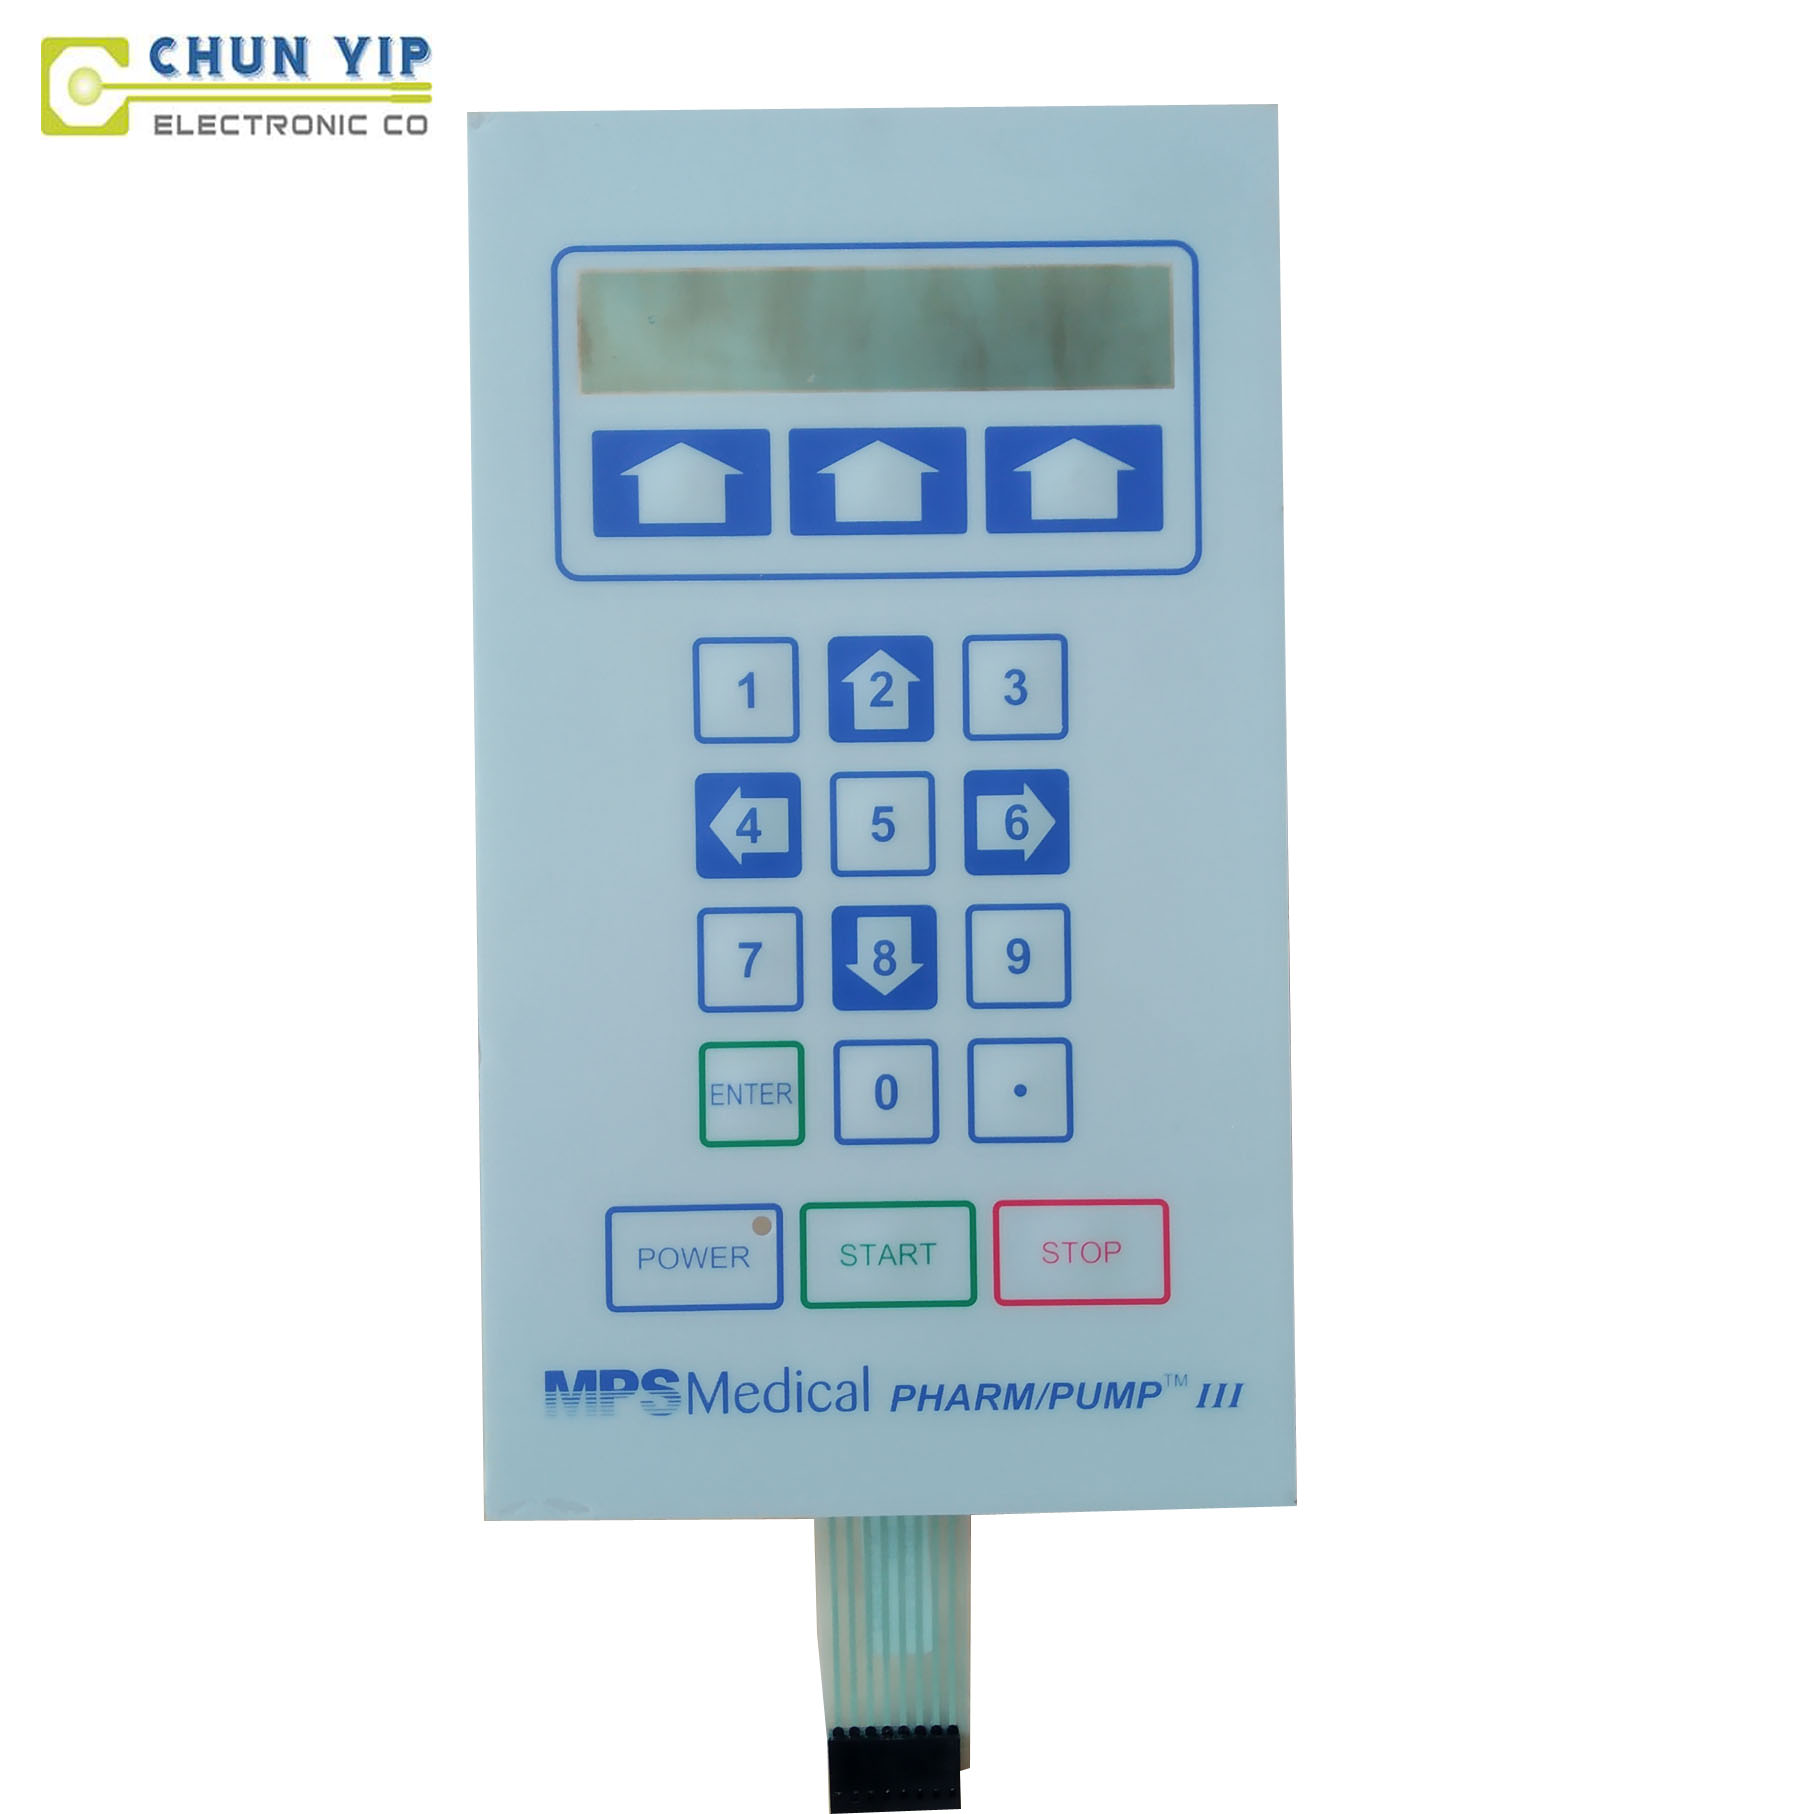 Alu-Zinc Roof Steel Universal Probe Test Leads -
 Medical apparatus and instruments Membrane Switch – Chun Yip